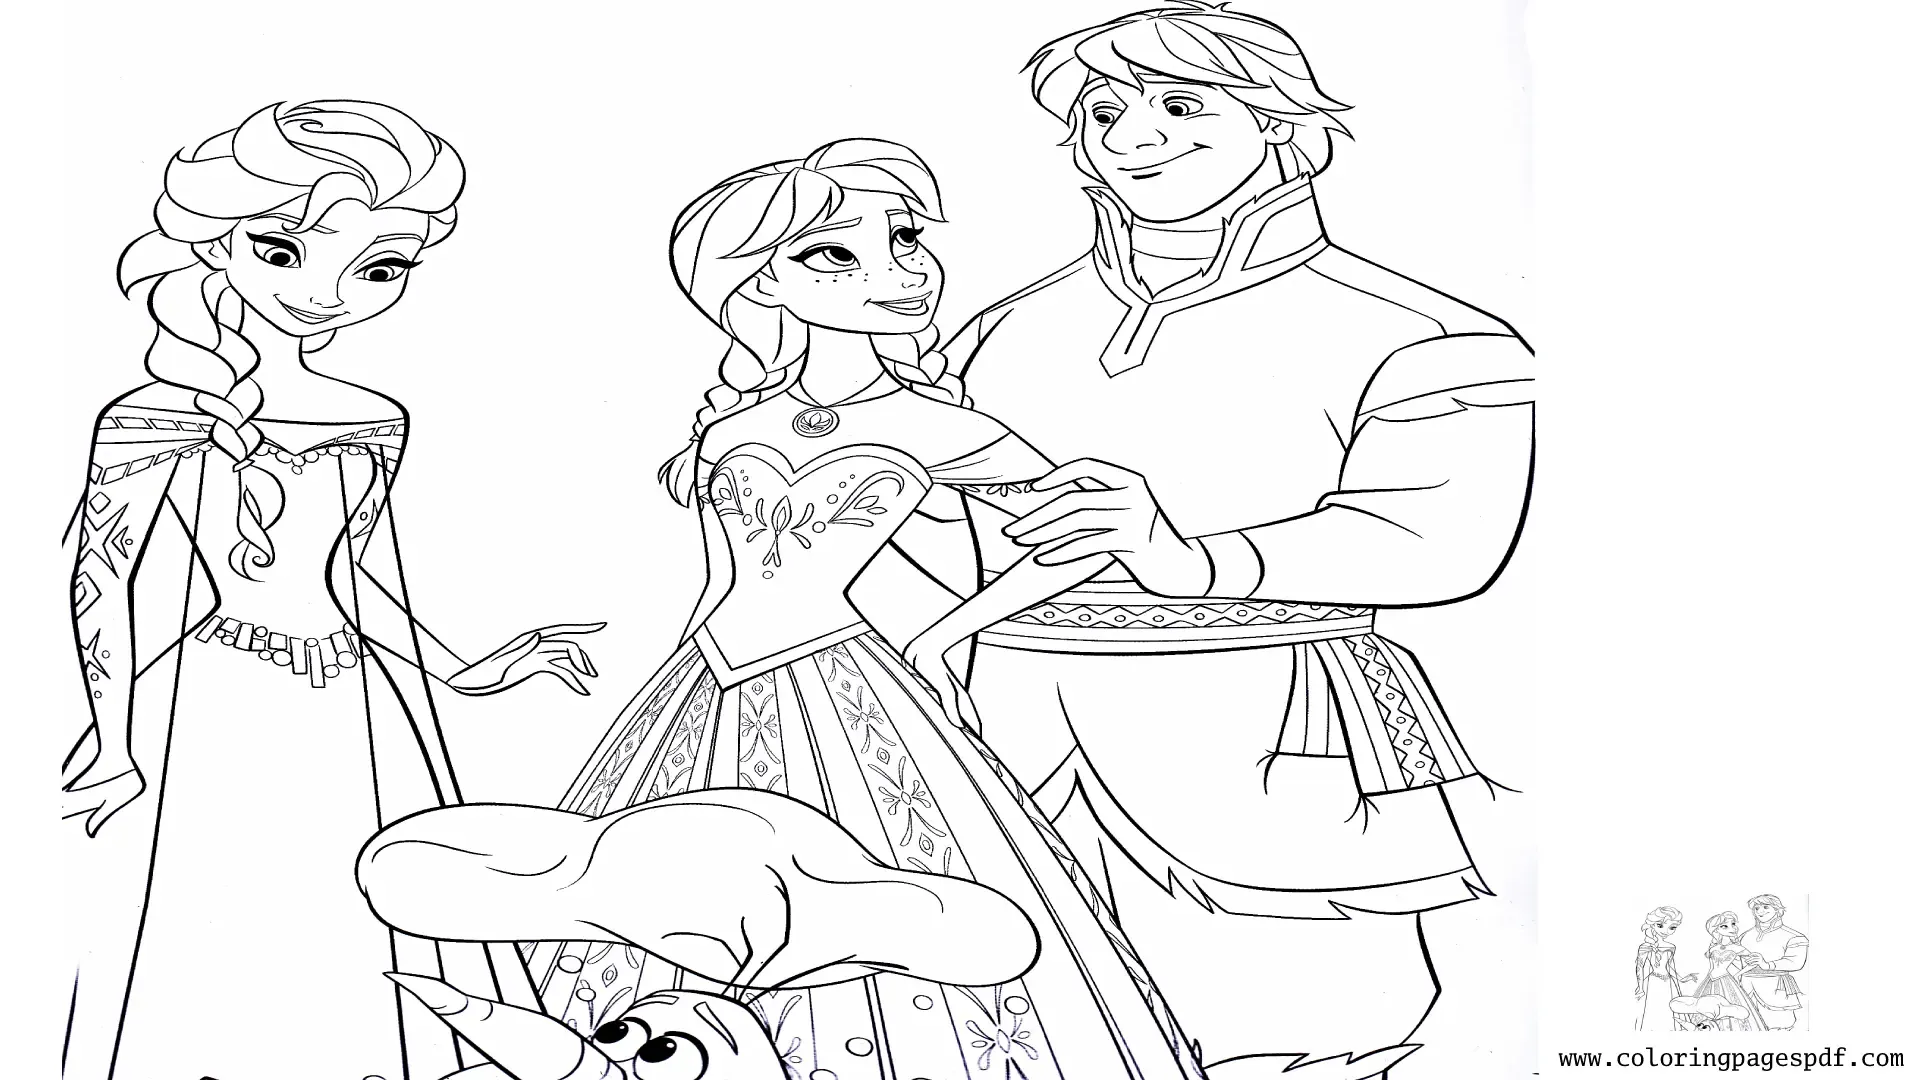 Coloring Page Of Elsa, Anna, Kristoff, And Olaf